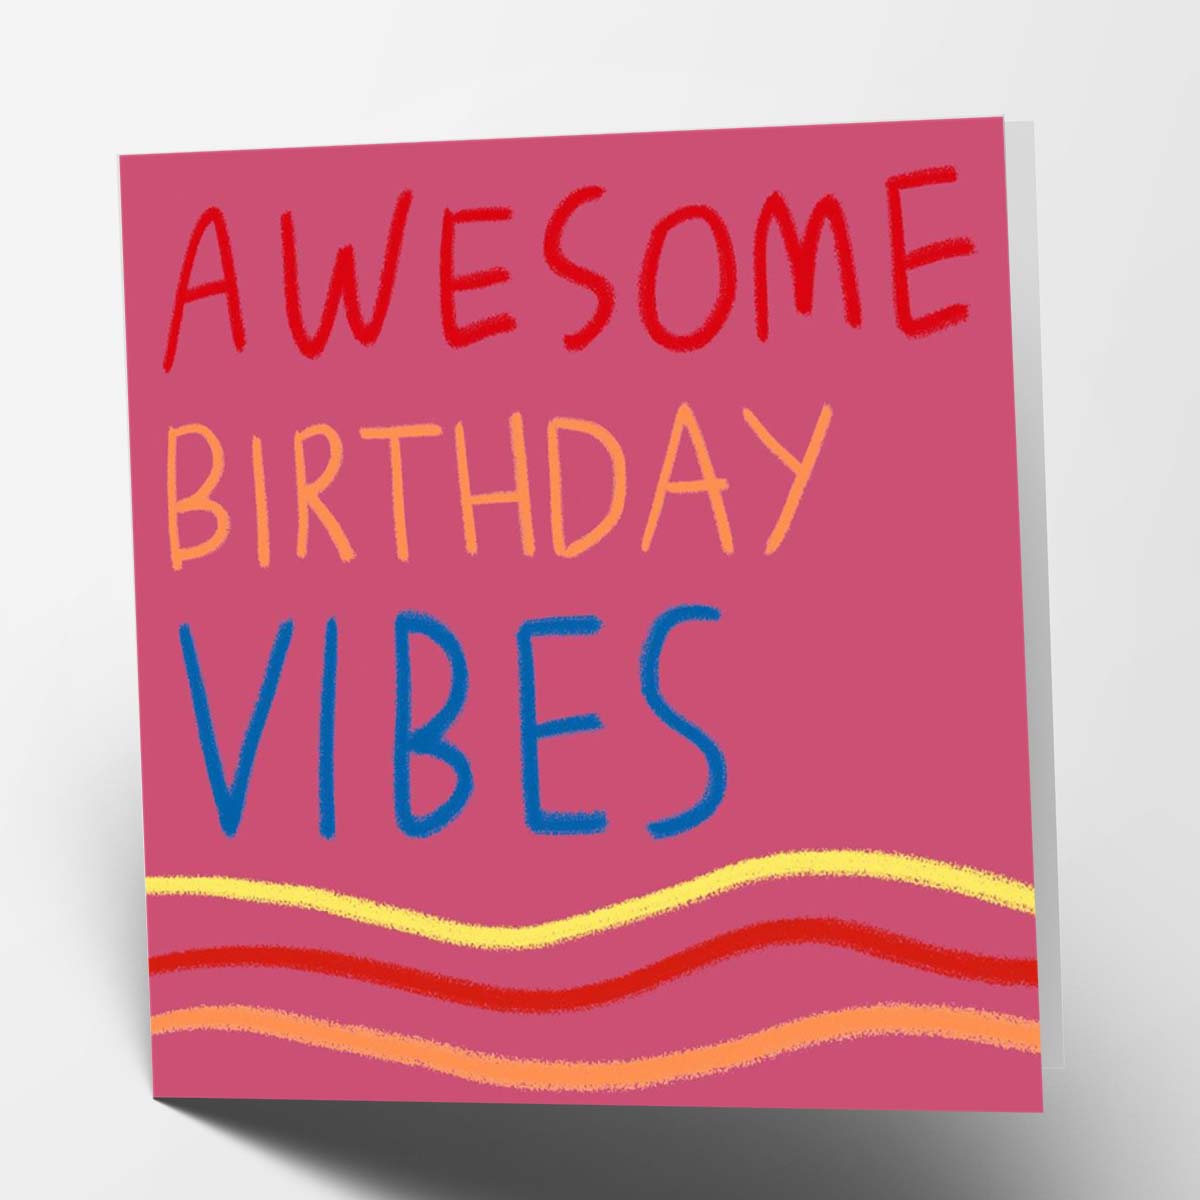 Awesome Birthday Vibes Greetings Card